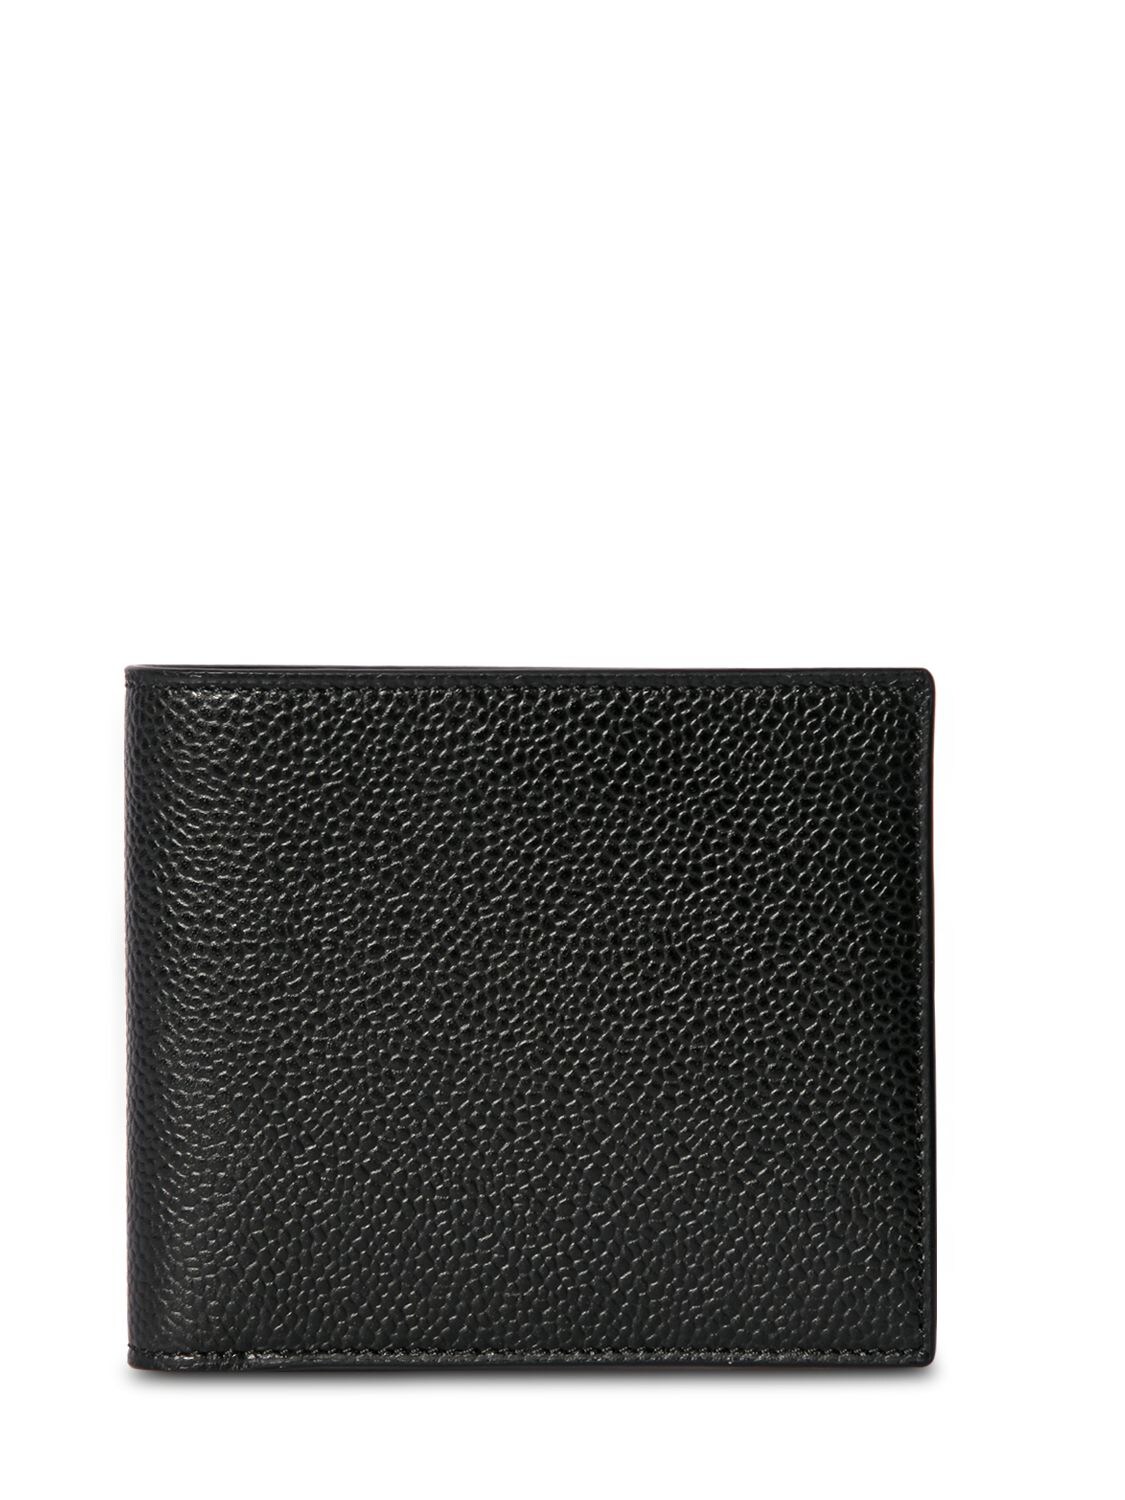 Image of Pebbled Leather Wallet